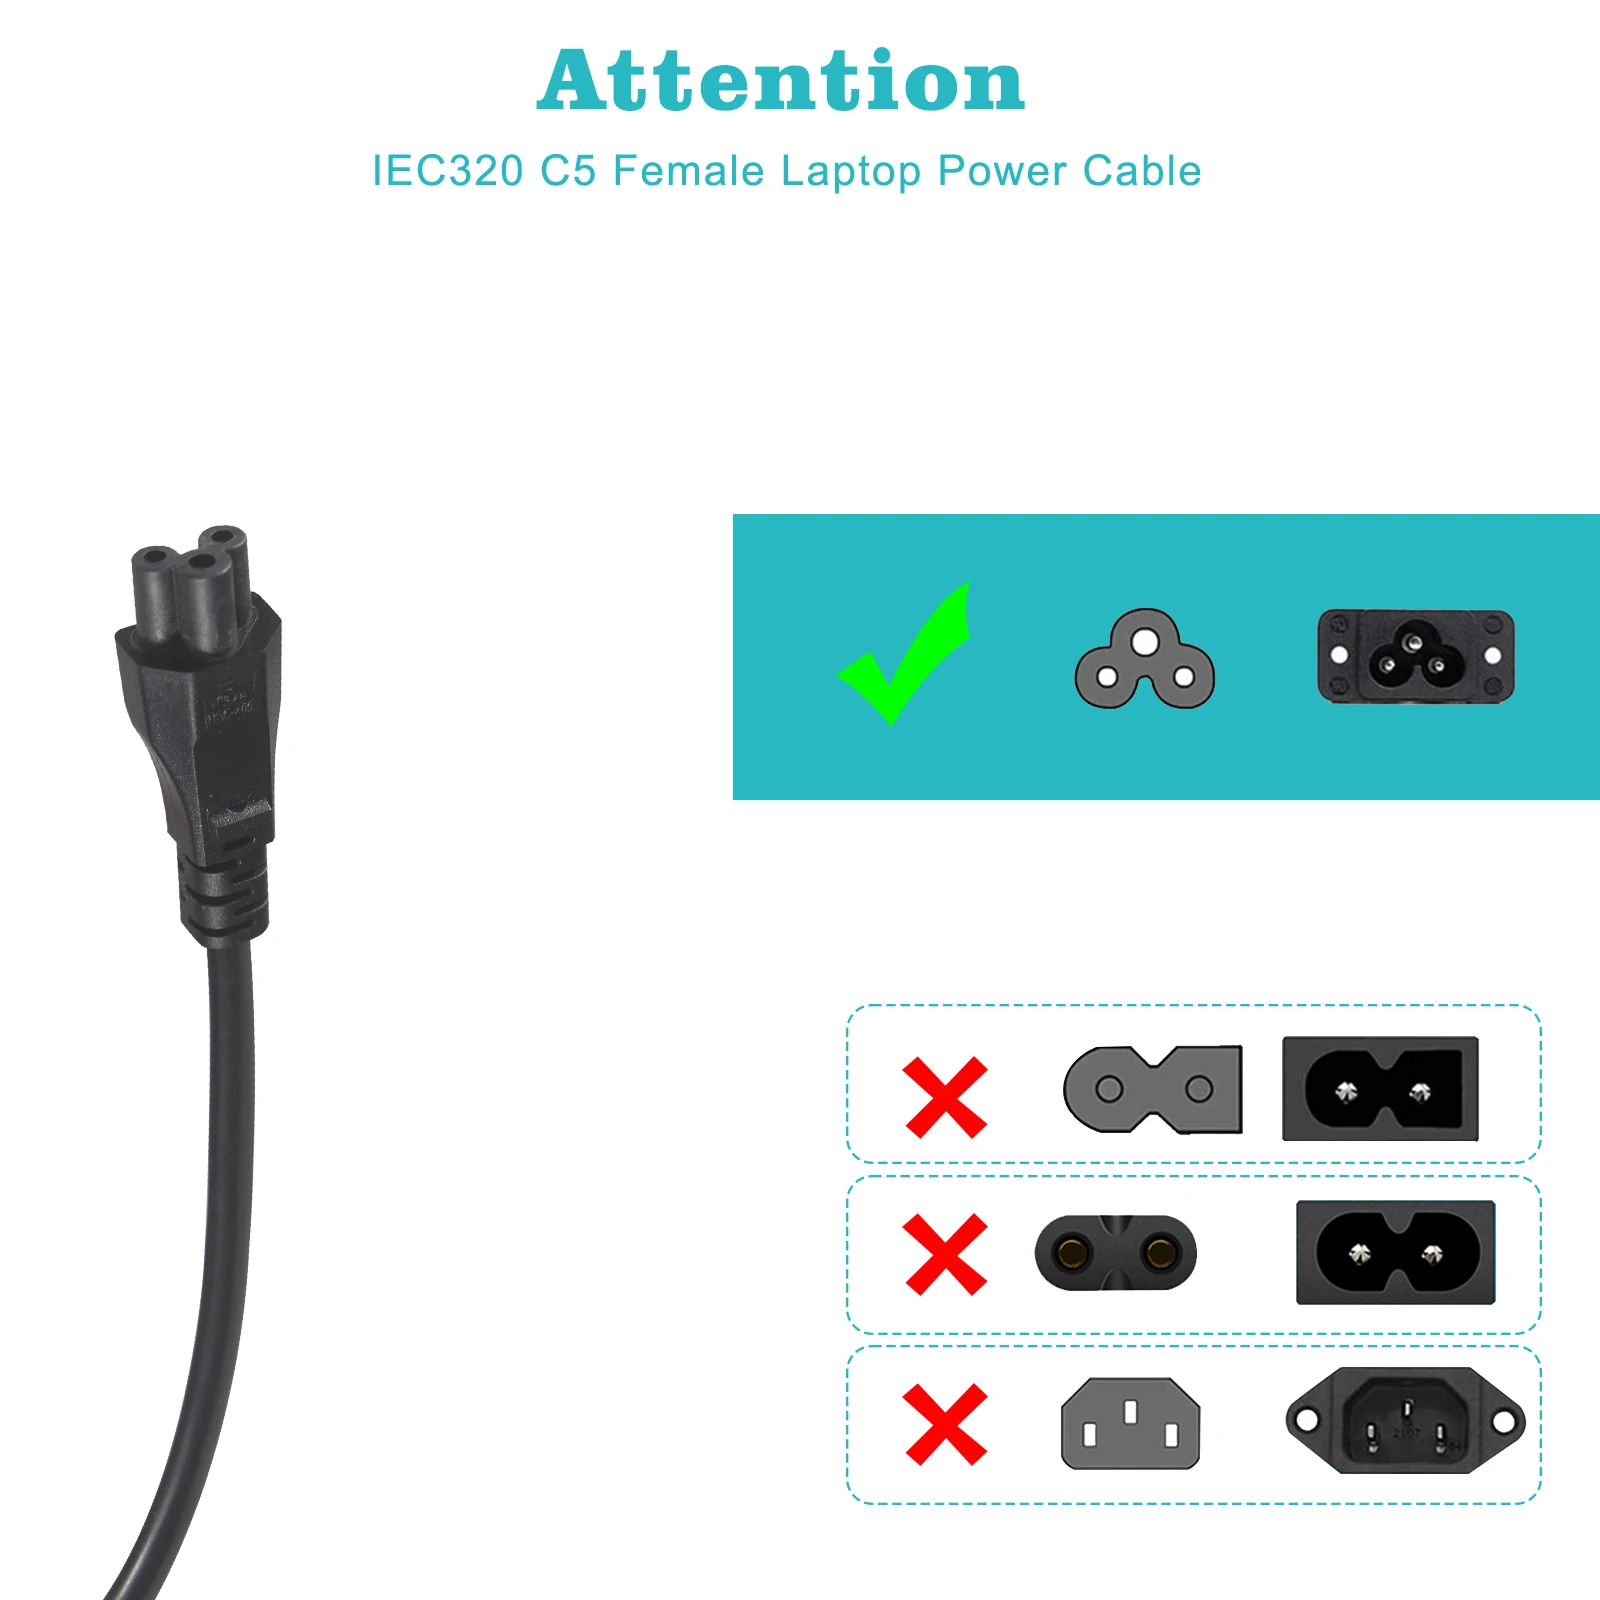 European 3 Pin To Iec C5 Power Cord for Notebook 9